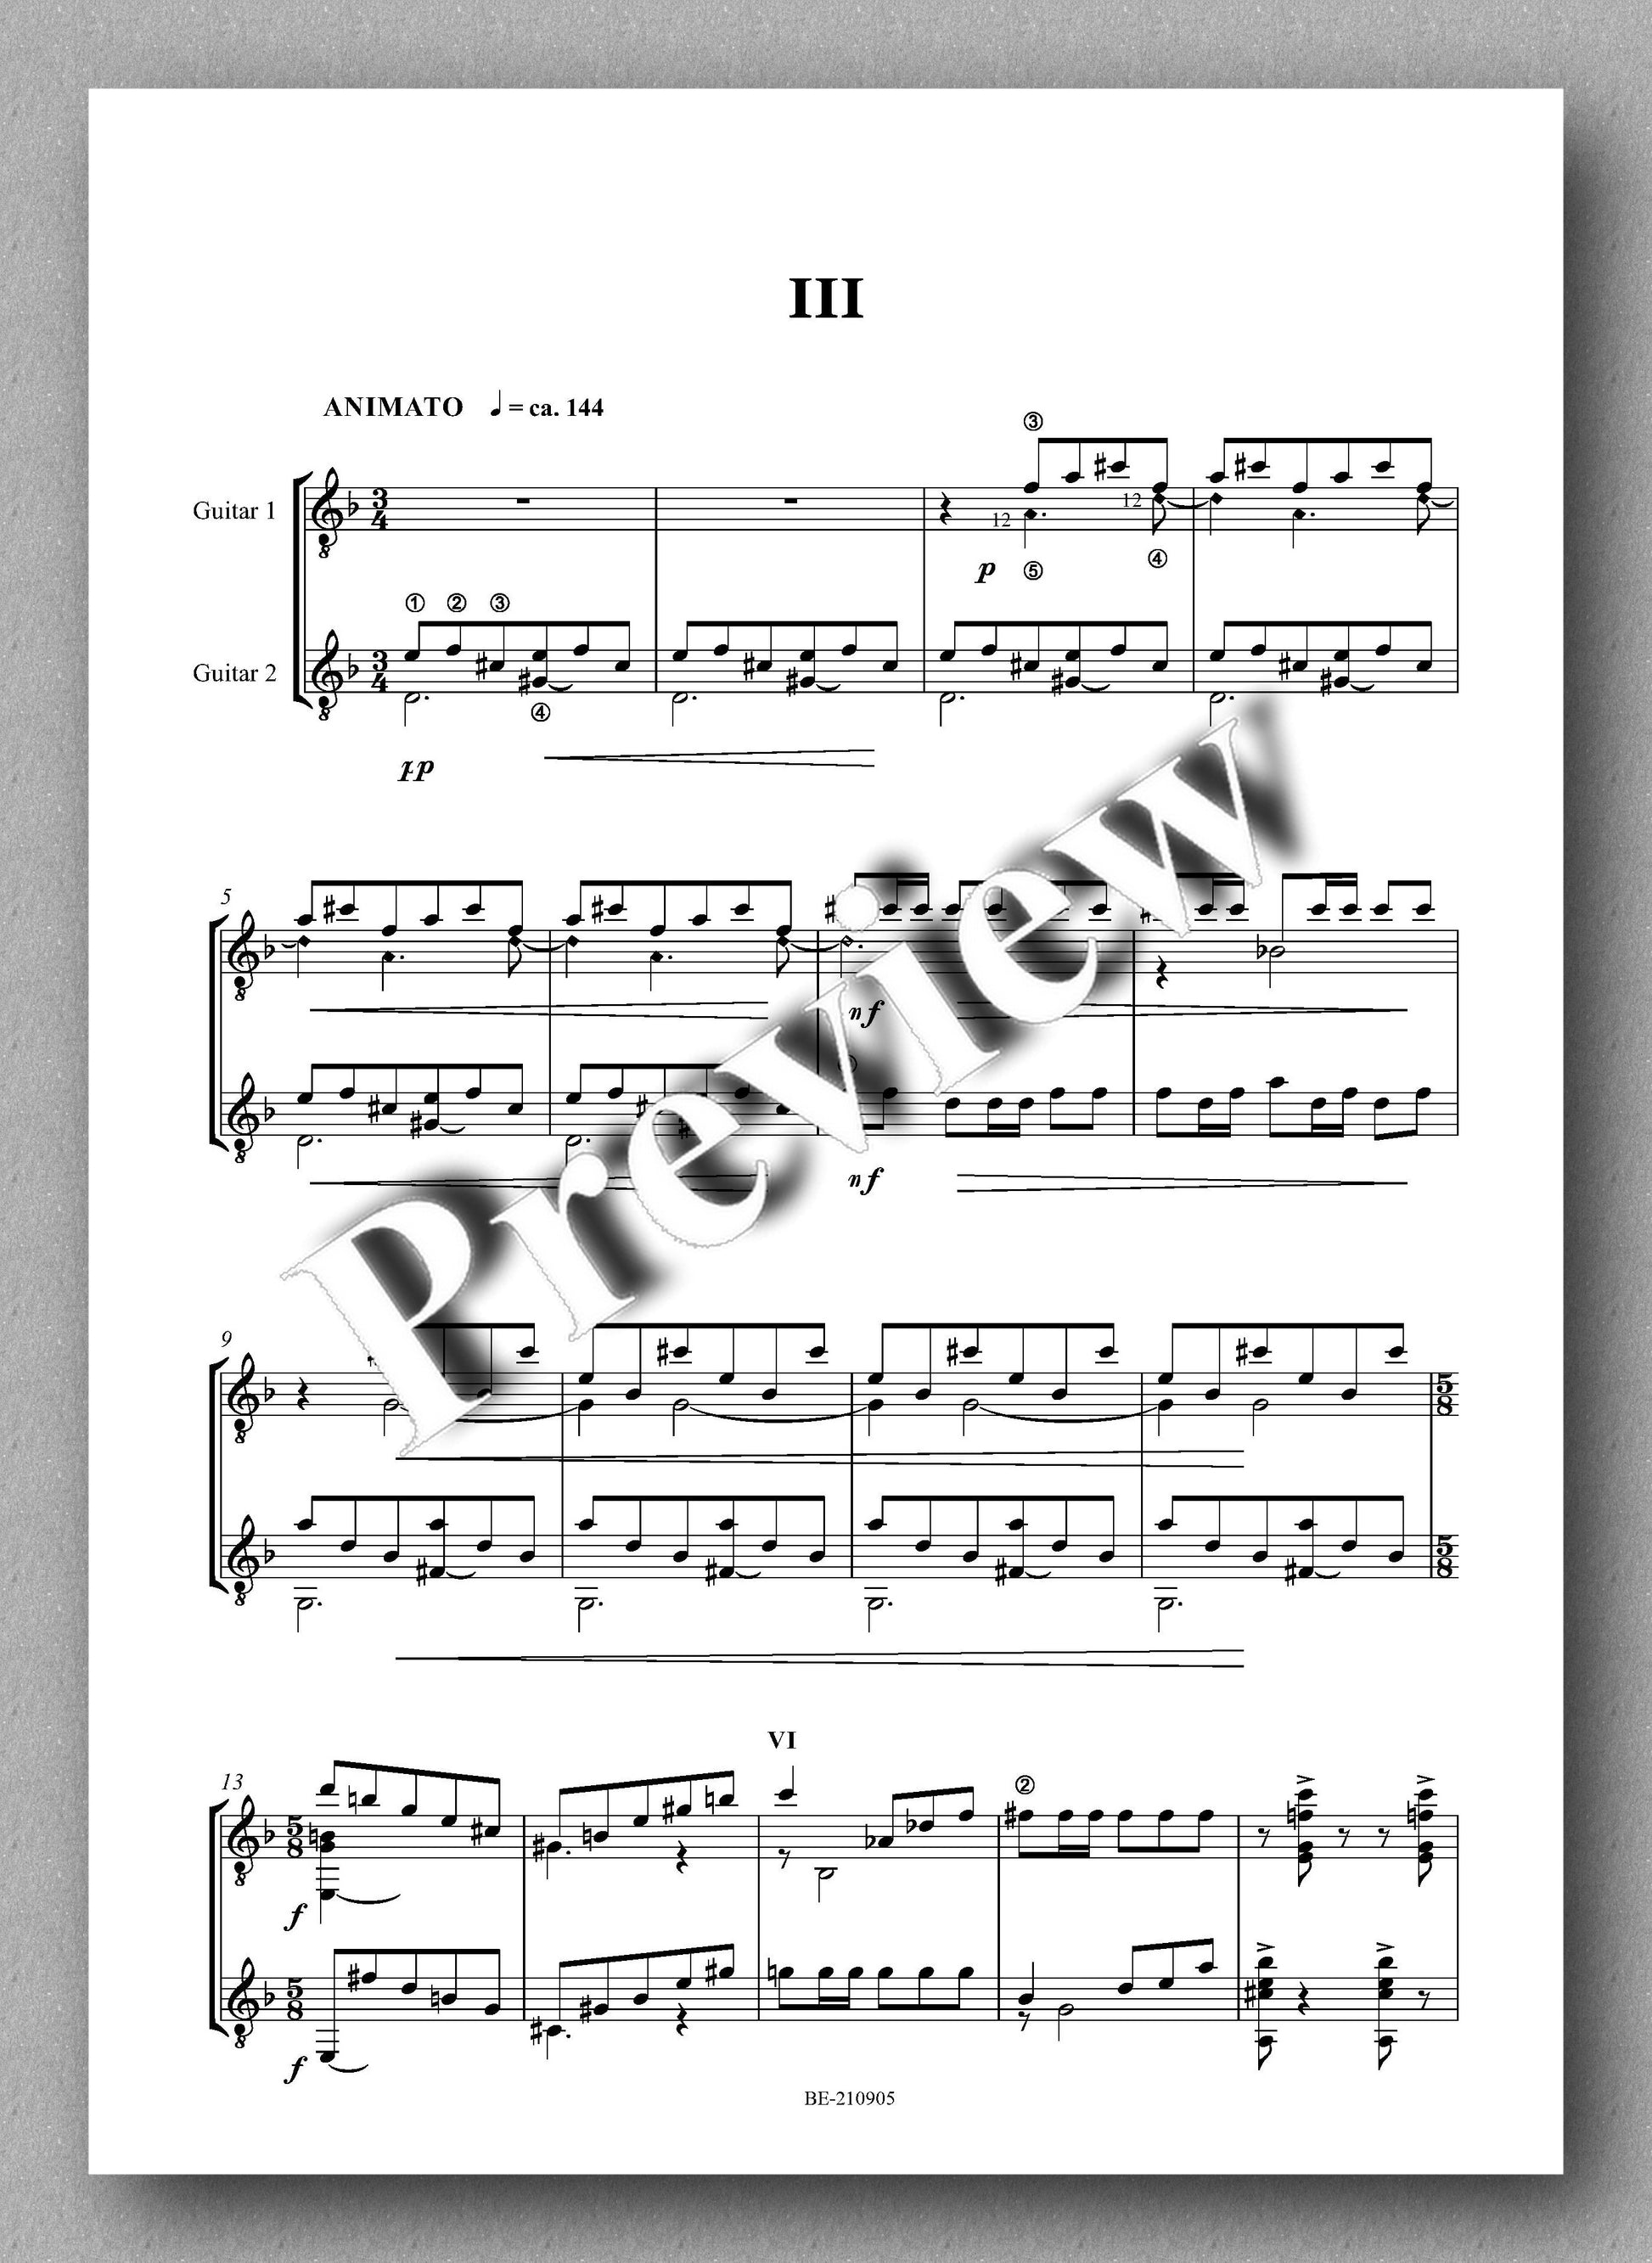 Østen Mikal Ore,  A Touch of Jazz - preview of the music score 3